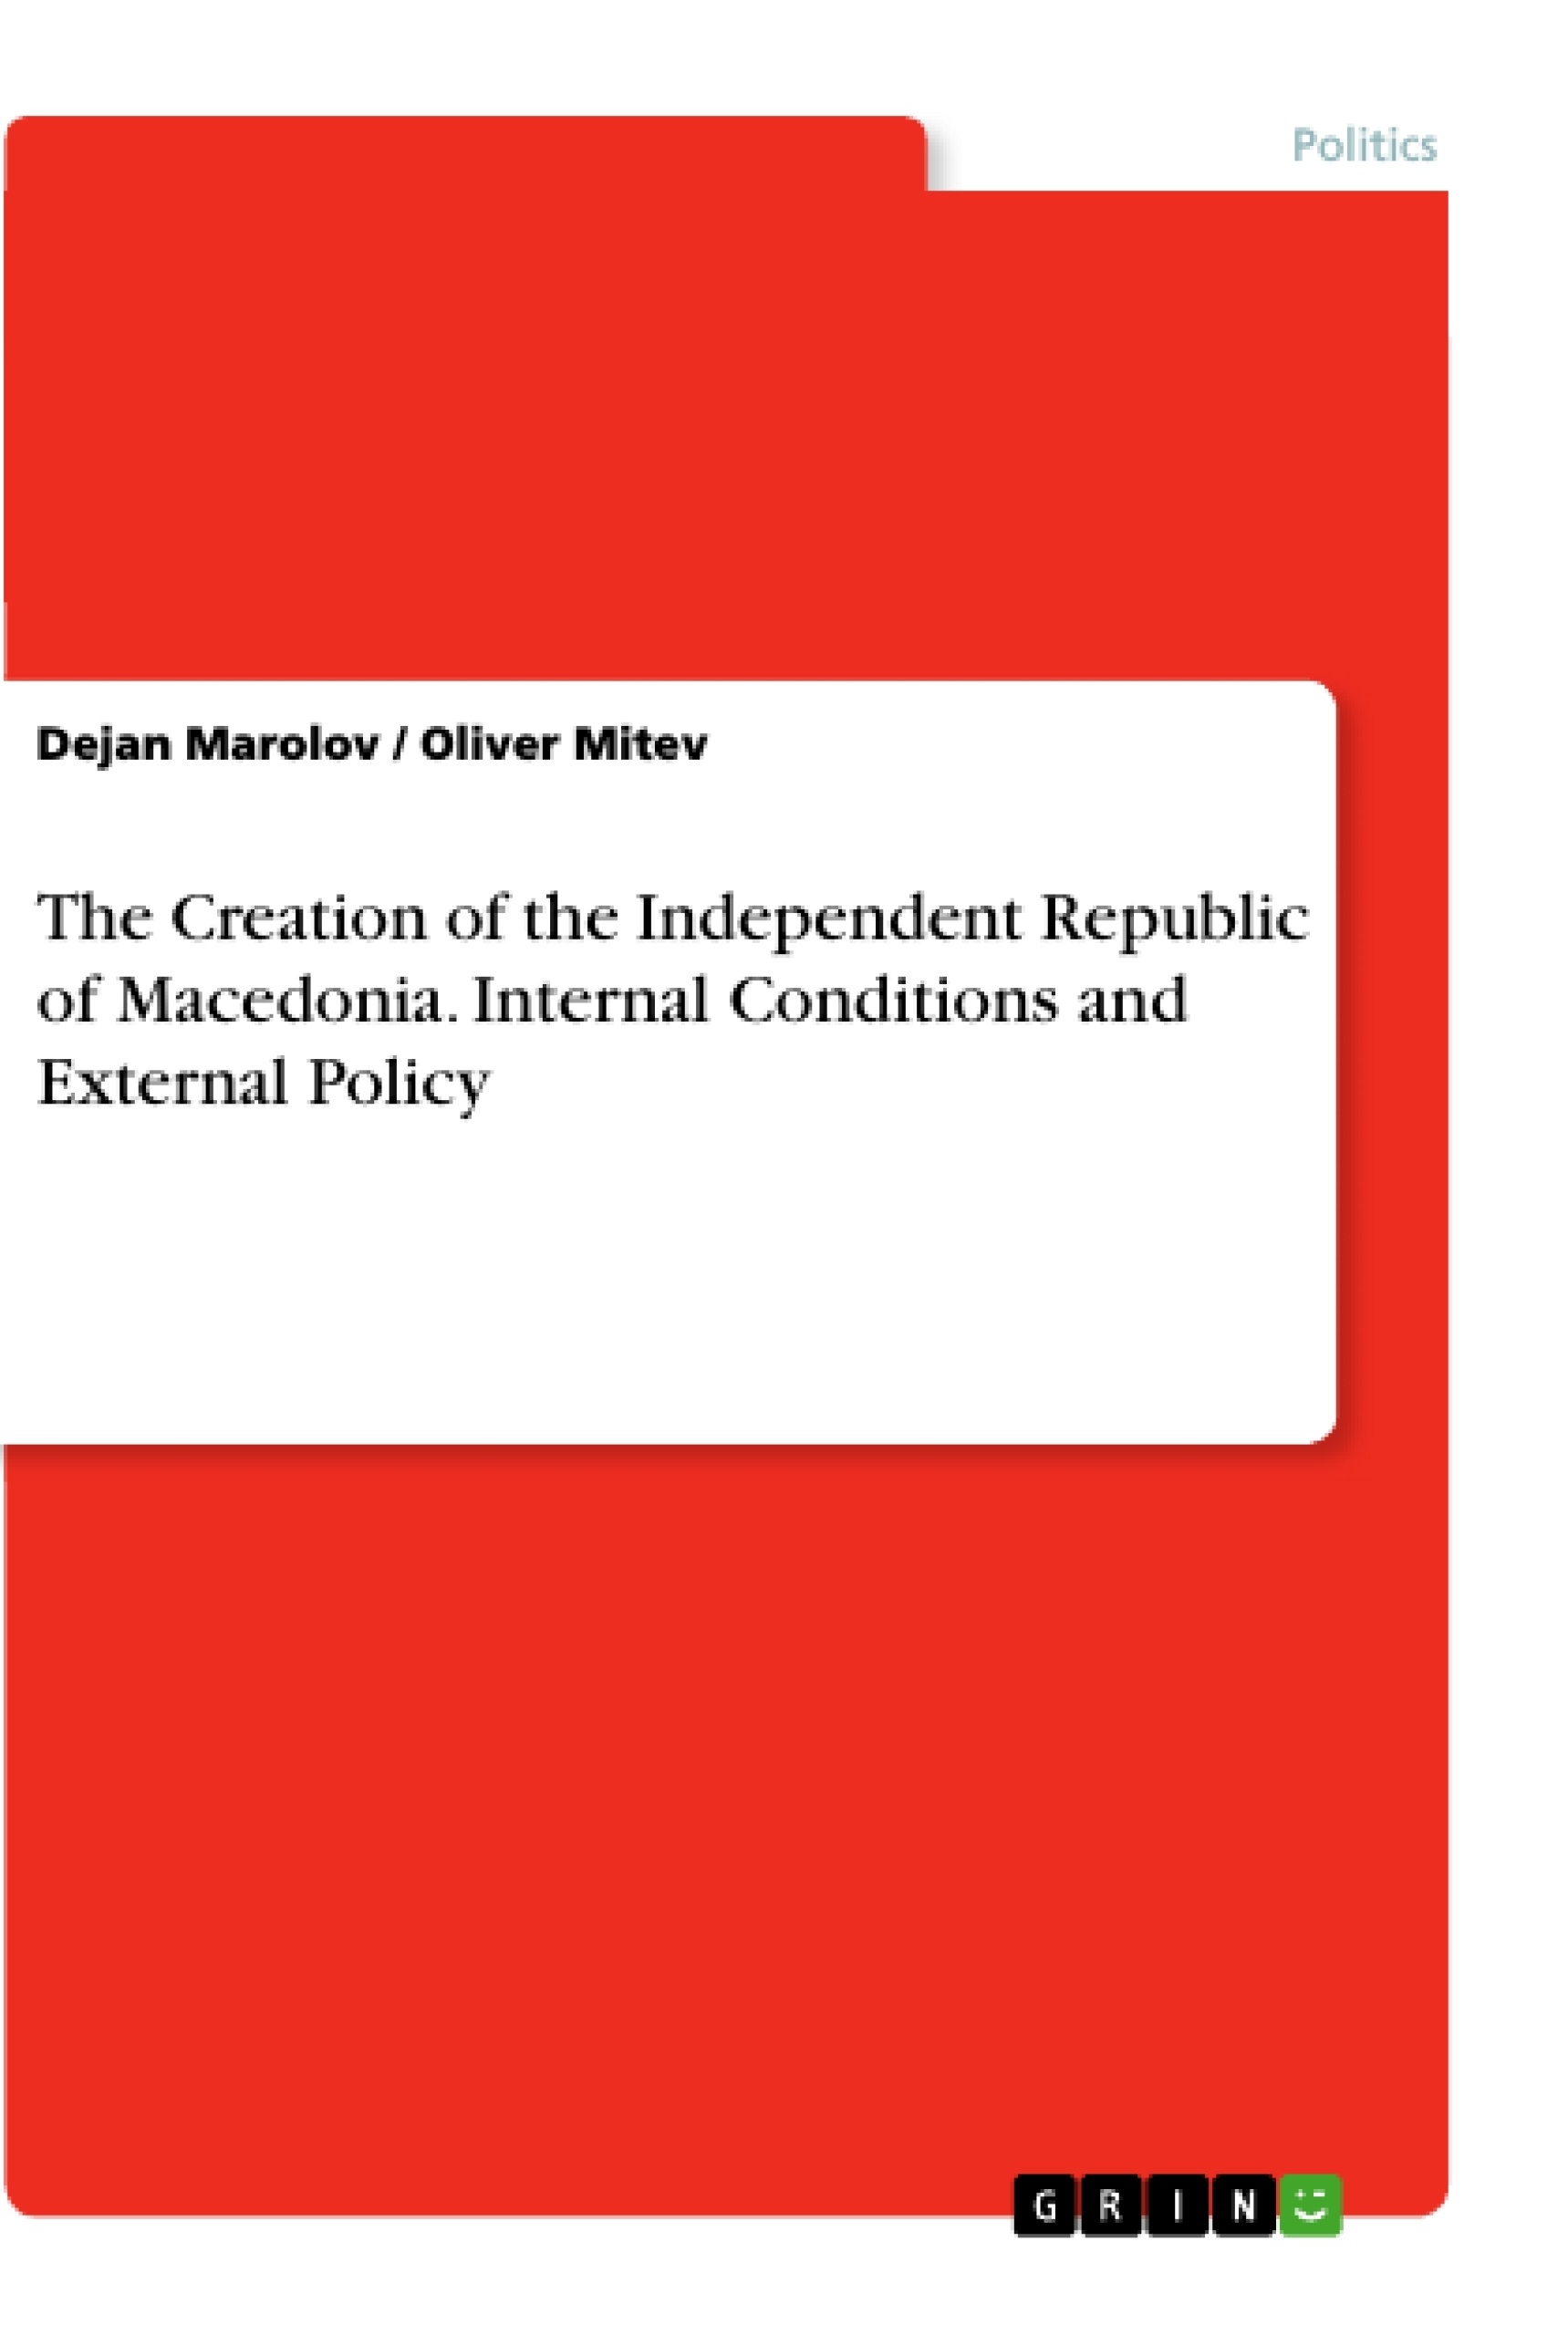 Titre: The Creation of the Independent Republic of Macedonia. Internal Conditions and External Policy